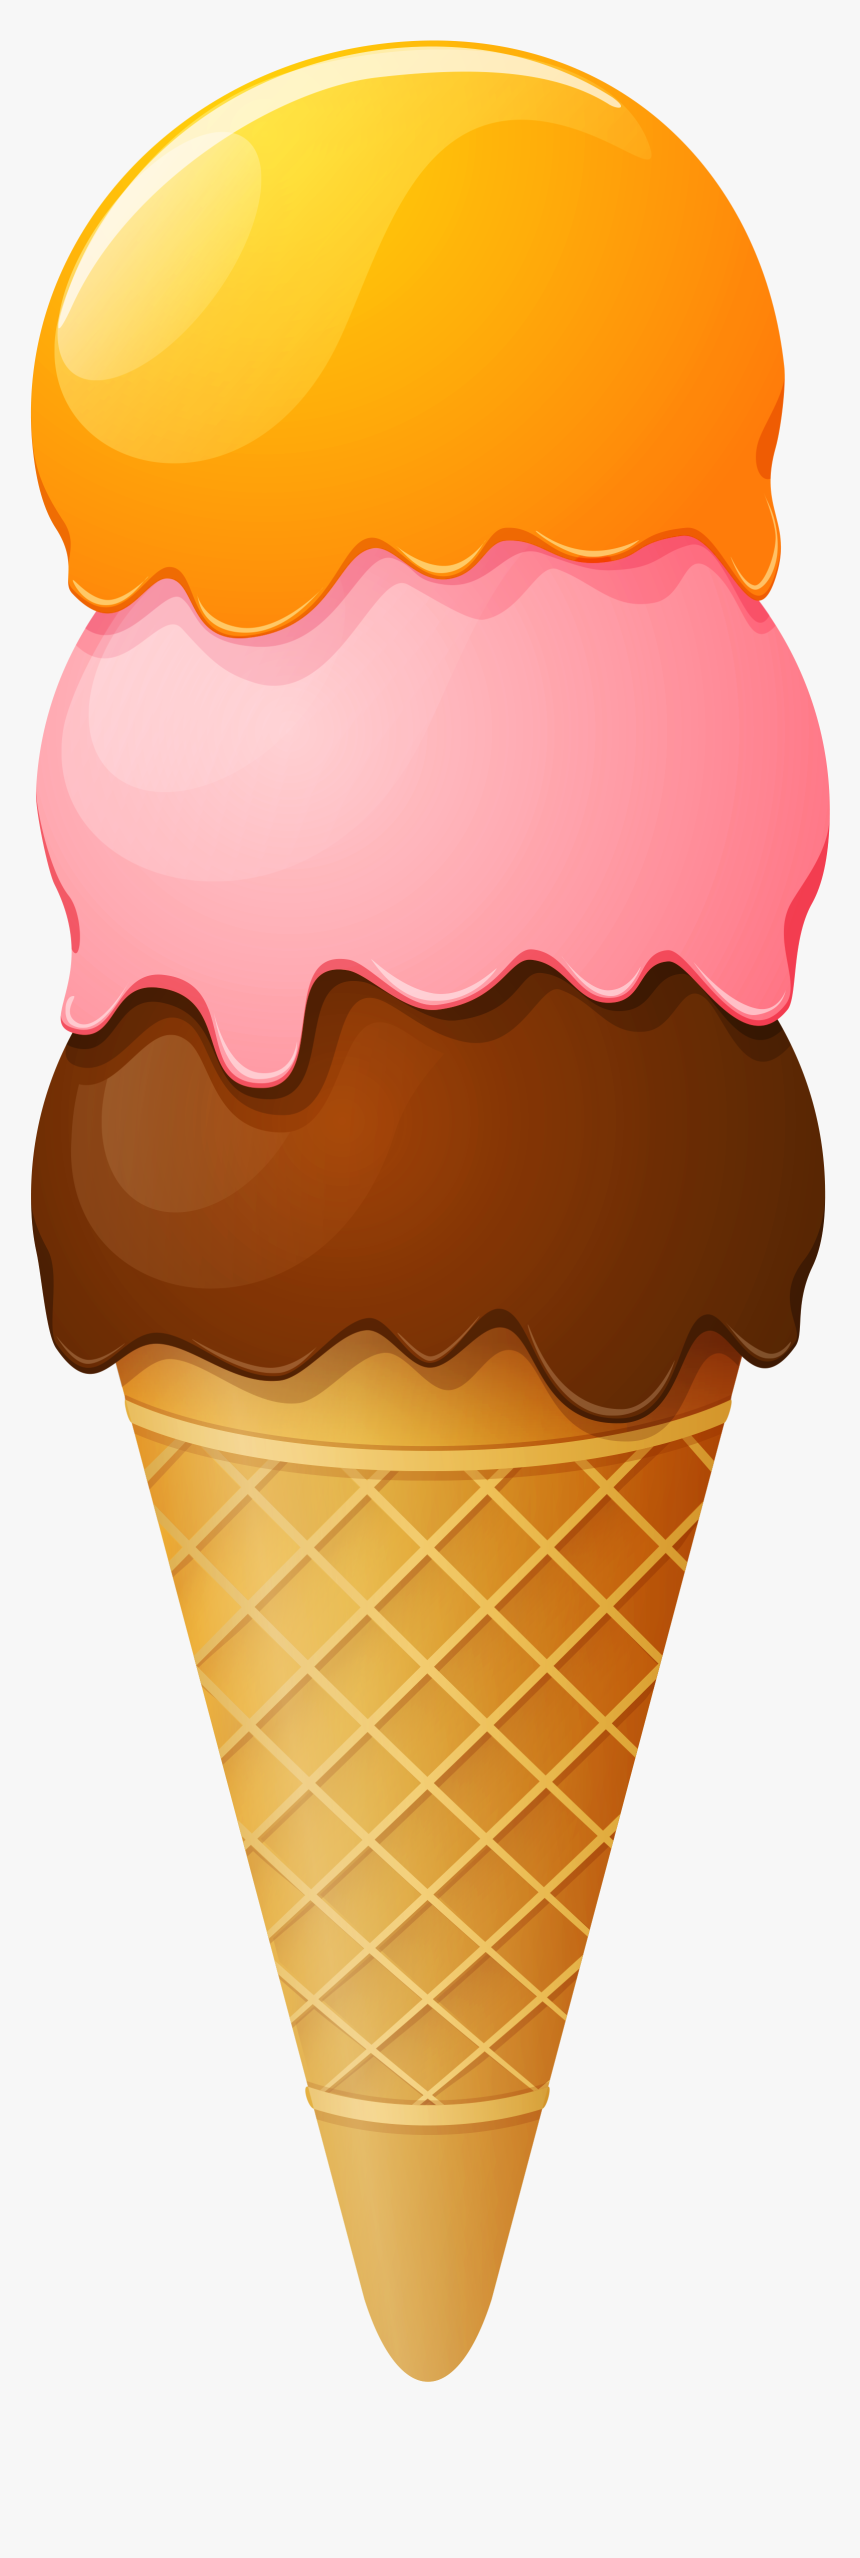 Chocolate Ice Cream - Transparent Background Ice Cream Cartoon Png, Png Download, Free Download